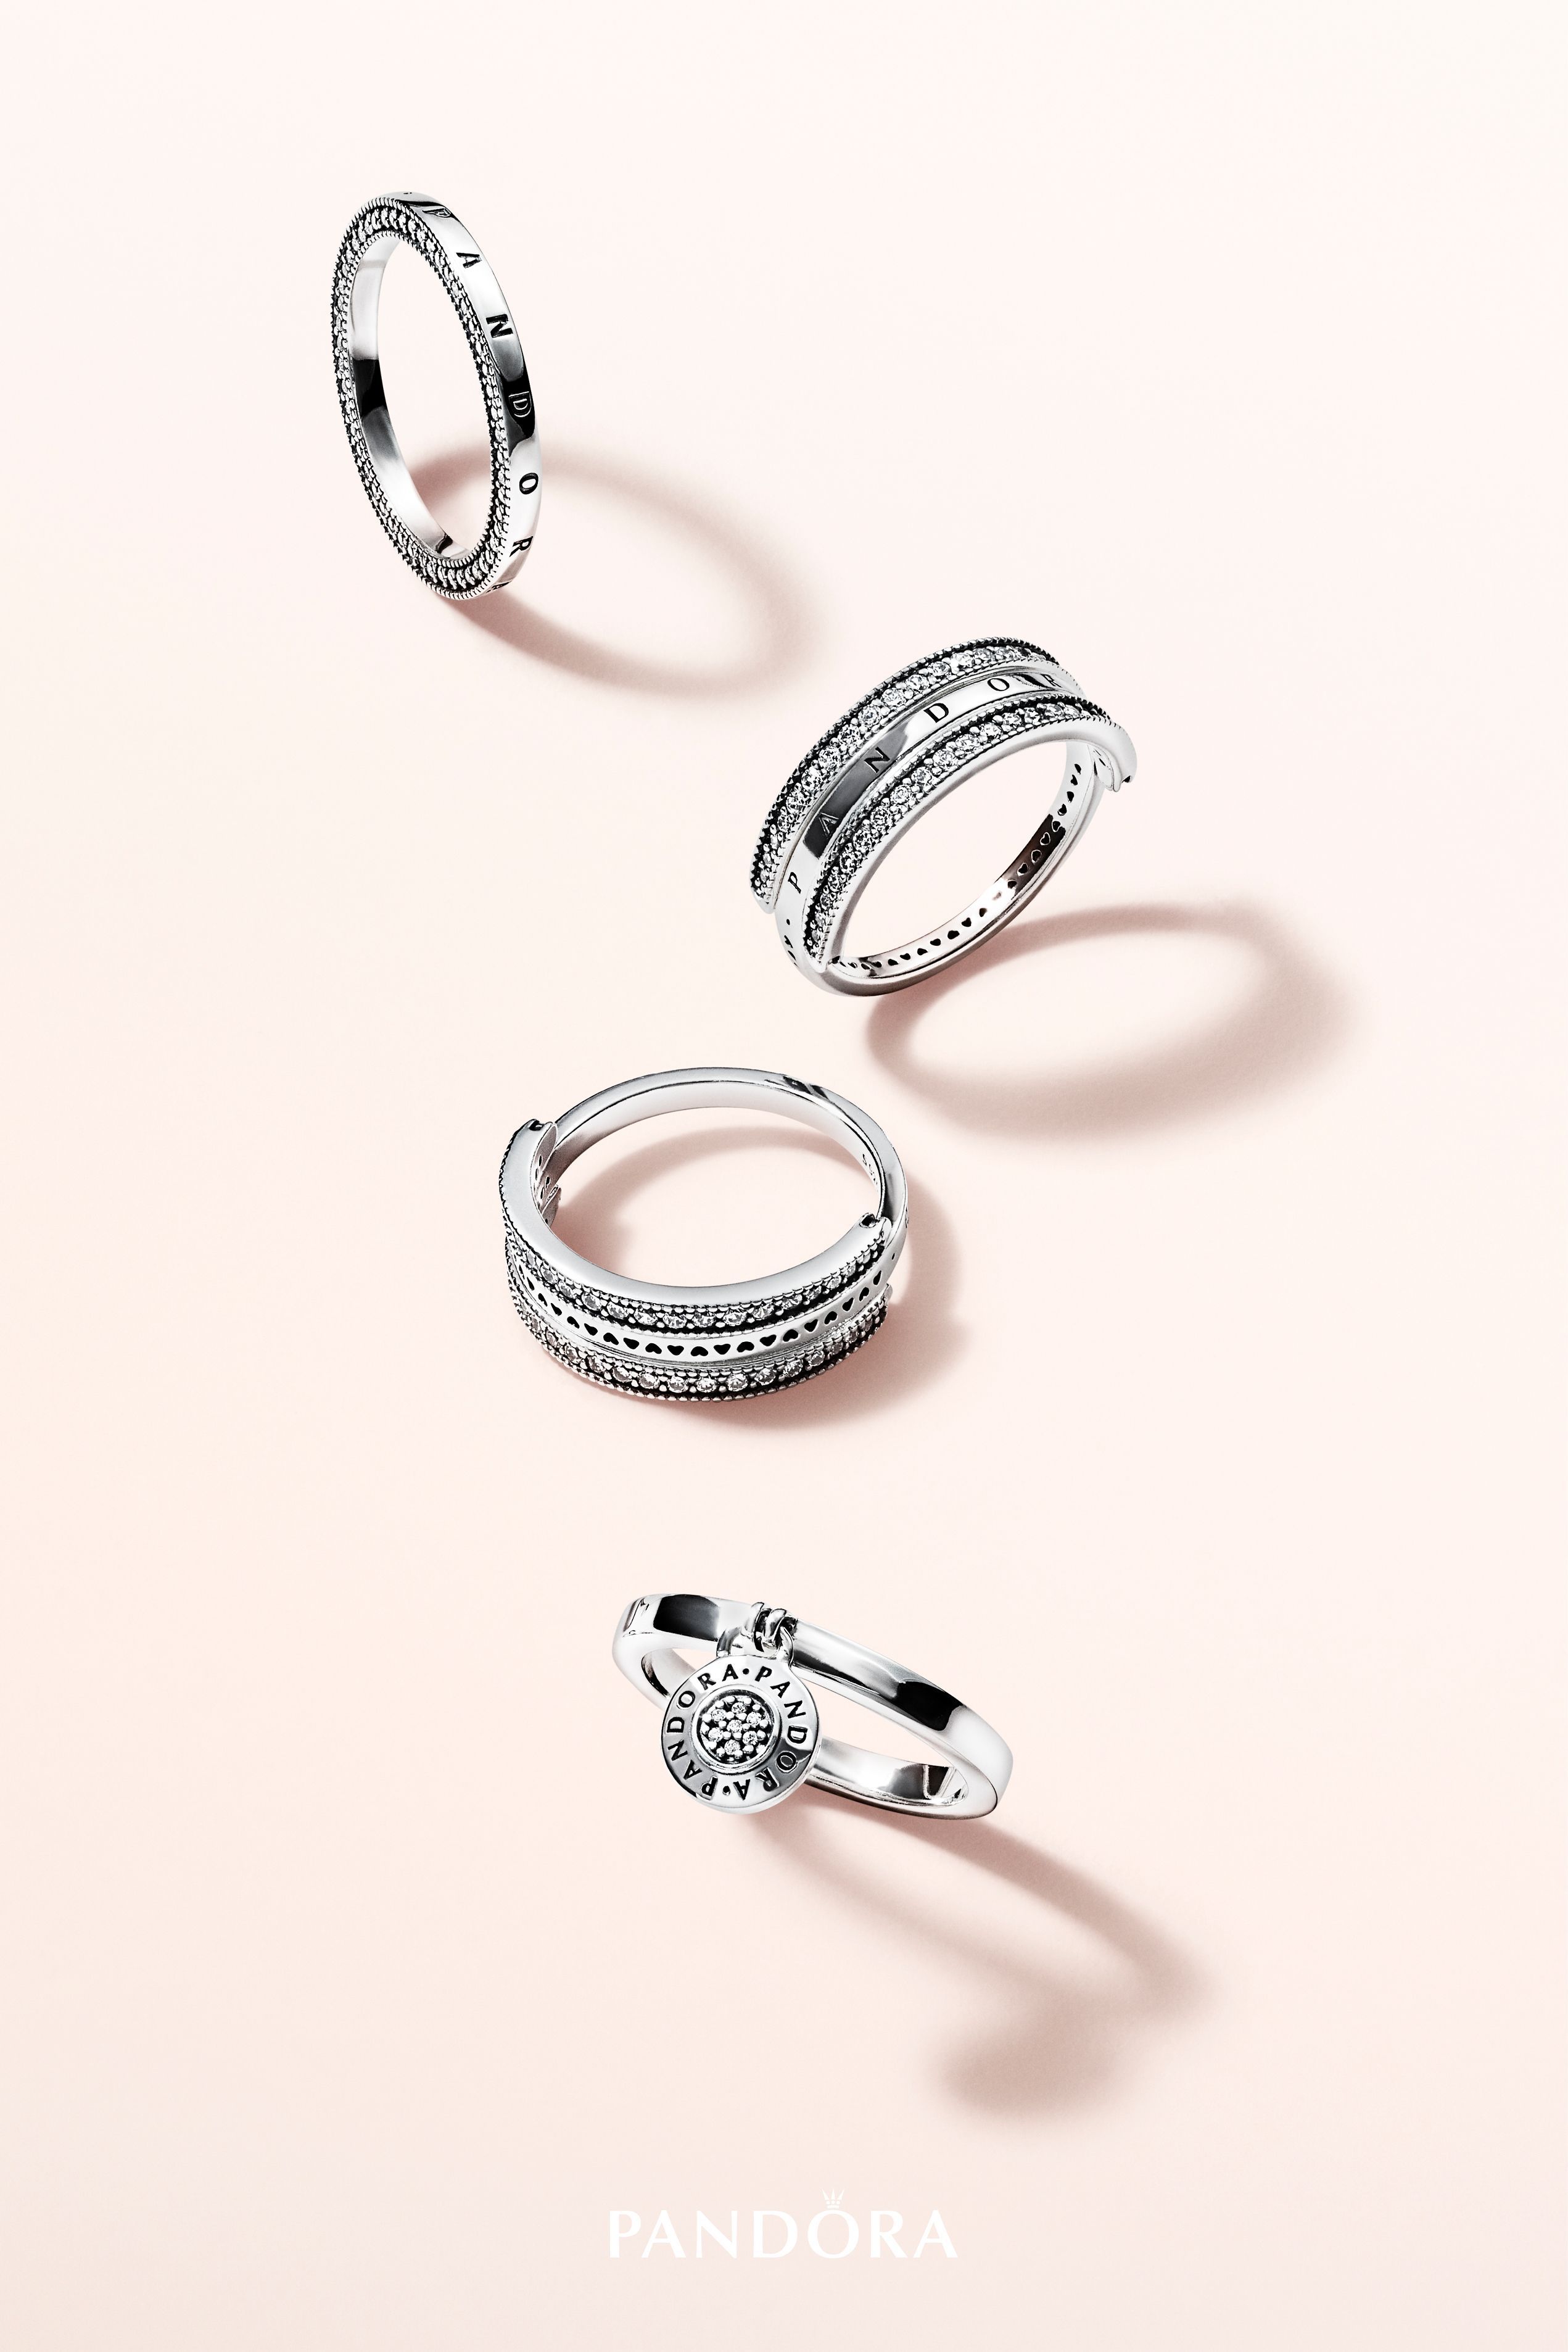 Make A Timeless Statement With New Rings From The Pandora Signature Regarding Best And Newest Pandora Logo Pavé Rings (View 20 of 25)